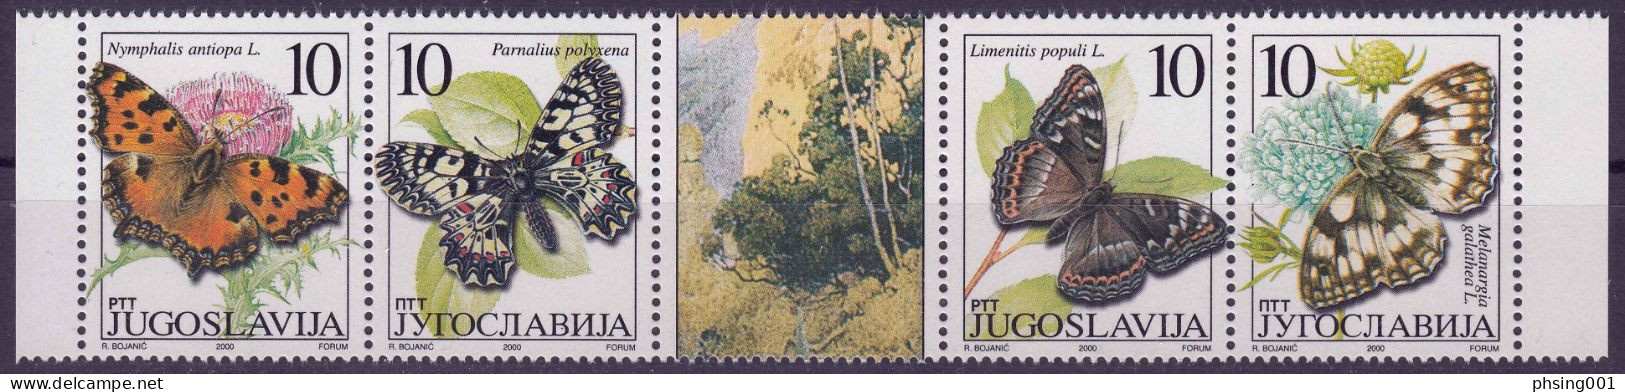 Yugoslavia 2000 Europa CEPT Millennium Butterflies Bee WWF Birds Olympic Games Sydney Costumes, Complete Year MNH - Annate Complete